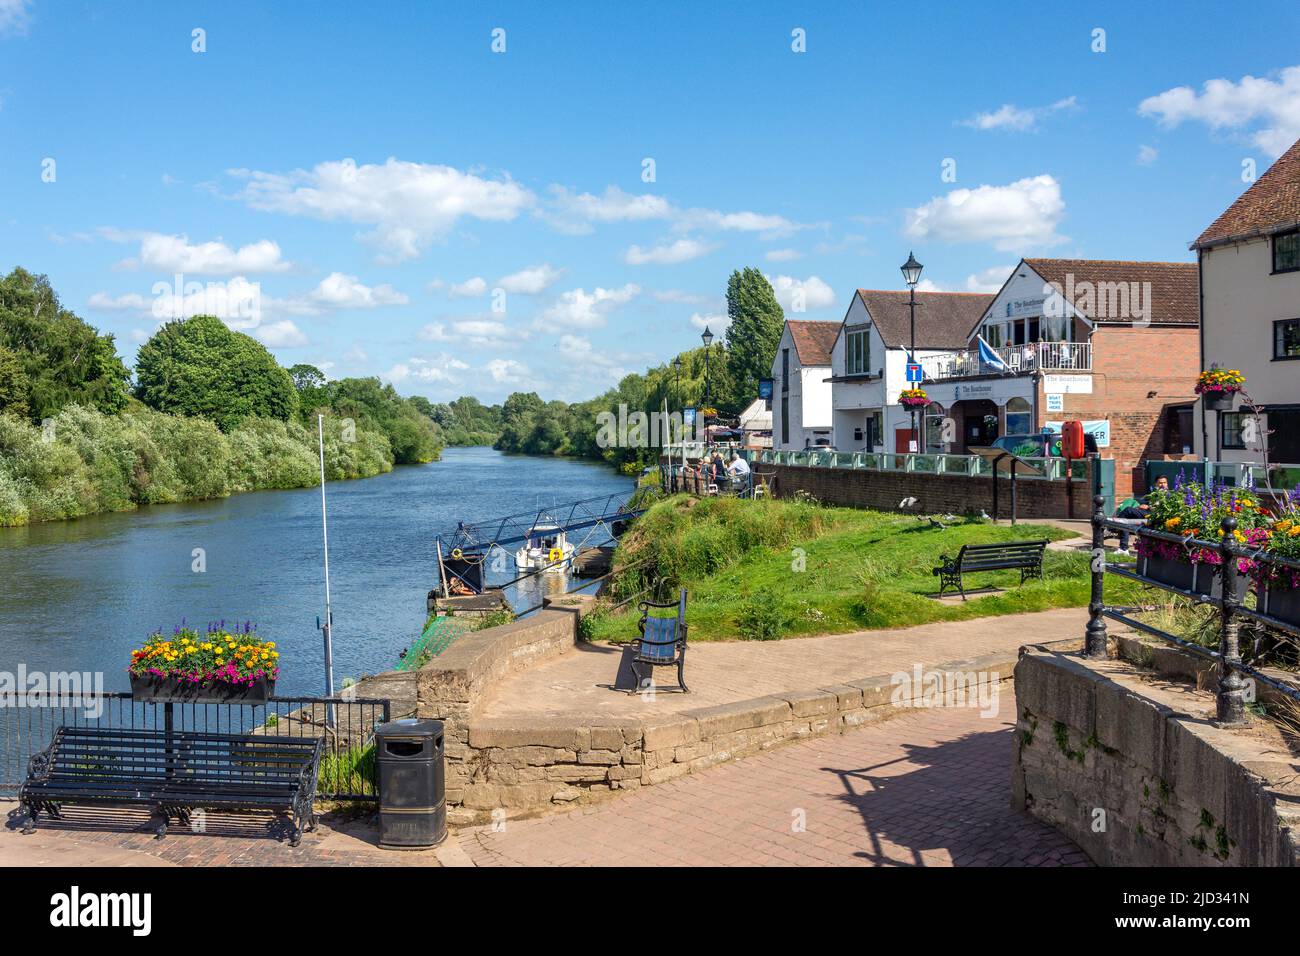 The River Severn at Riverside, Upton-upon-Severn, Worcestershire, England, United Kingdom Stock Photo